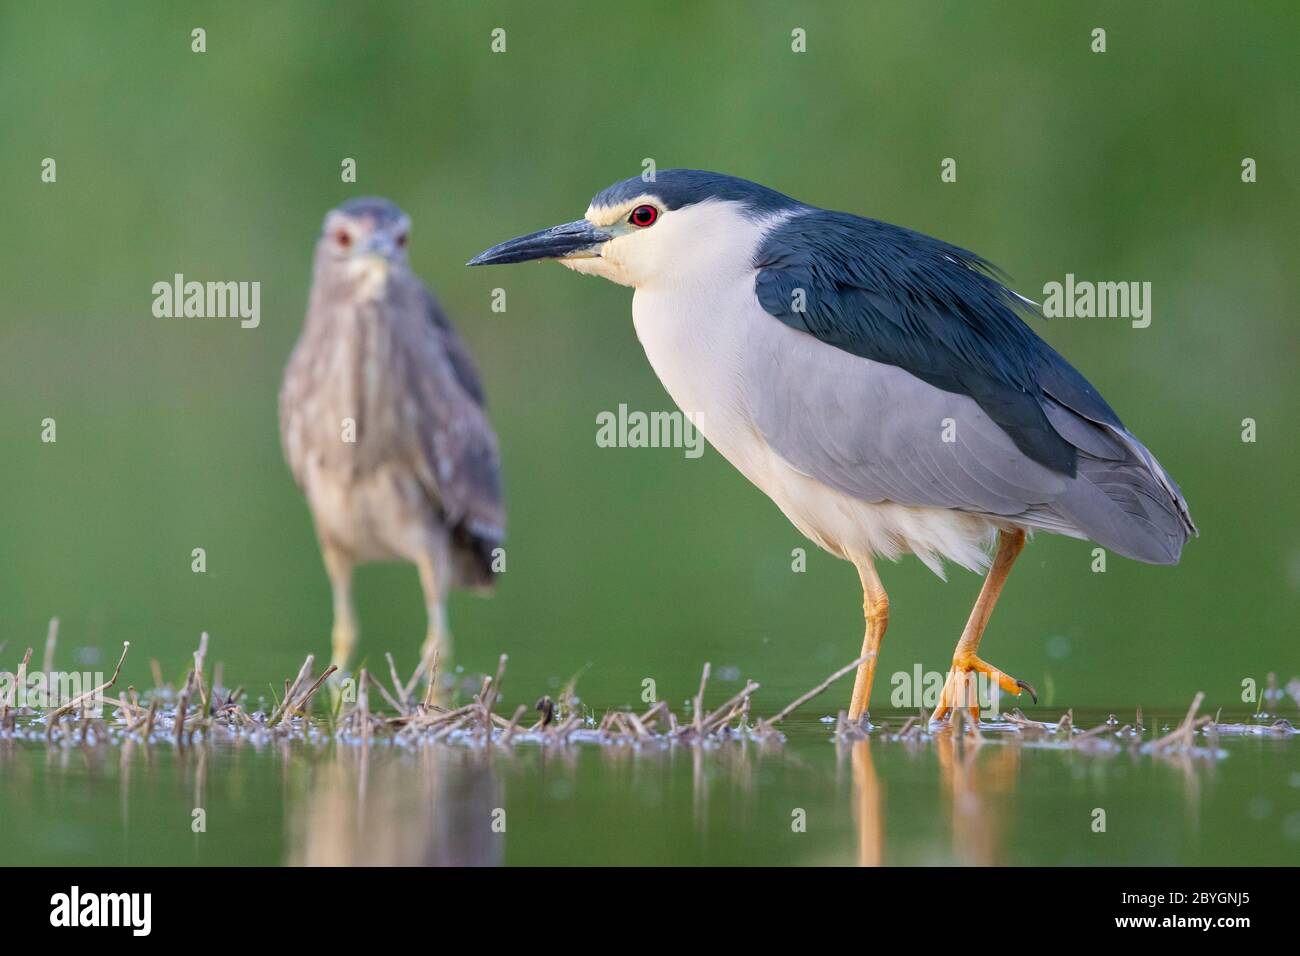 Black-crowned Night Heron (Nycticorax nycticorax), adult and a juvenile standing in the water, Campania, Italy Stock Photo